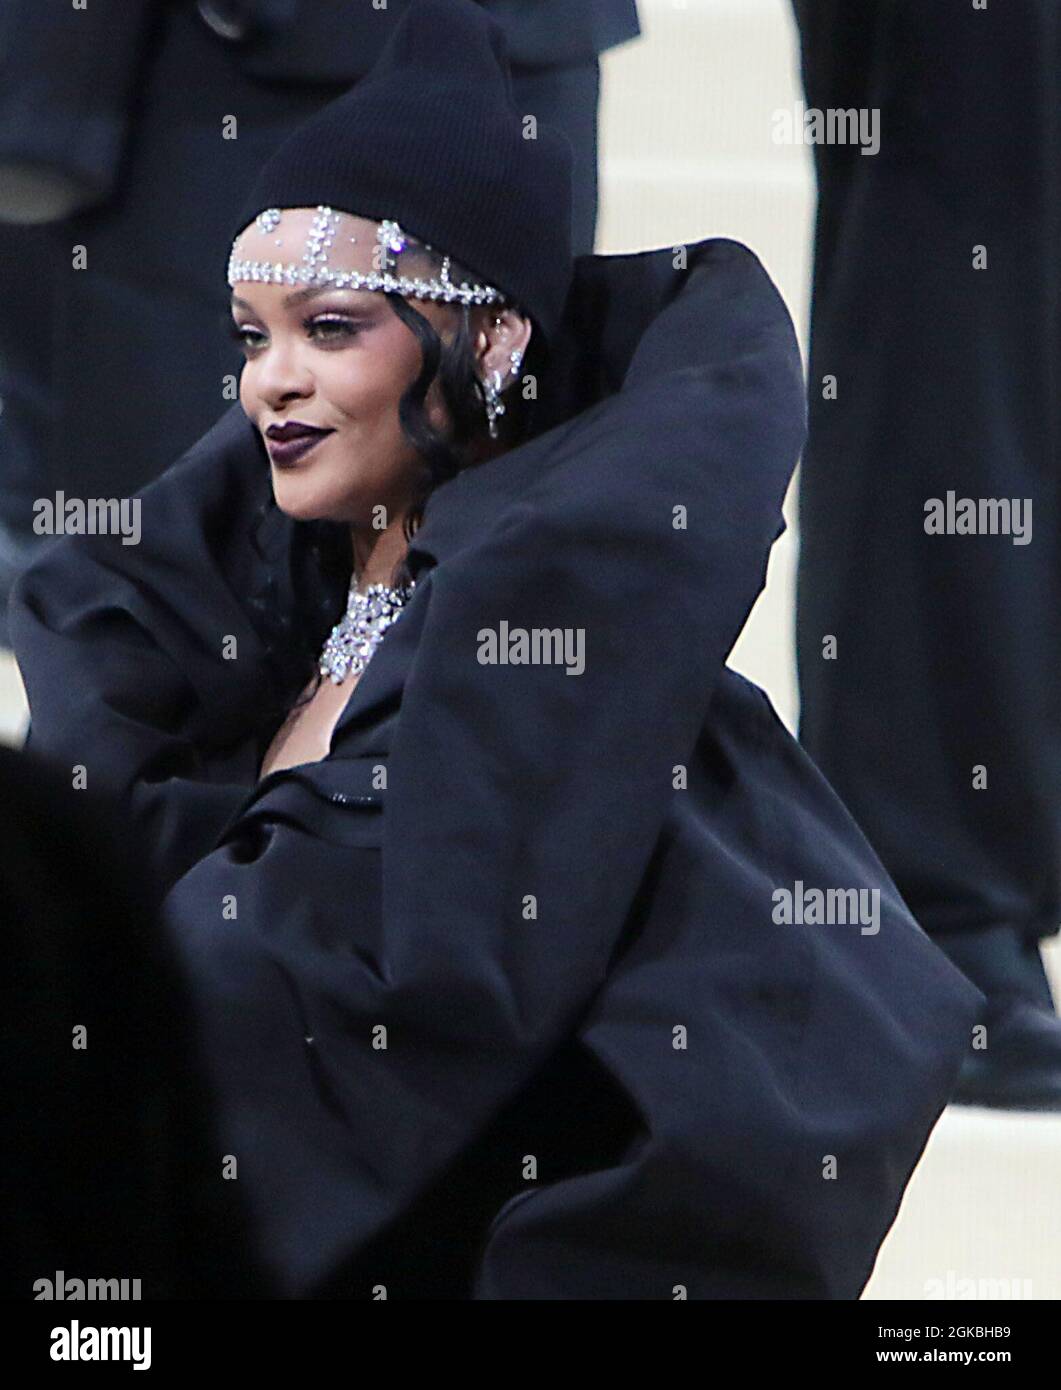 September 13, 2021.Rihanna attend The 2021 Met Gala Celebrating In America: A Lexicon Of Fashion atMetropolitan Museum of Art in New York September 13, 2021 Credit:RW/MediaPunch Stock Photo